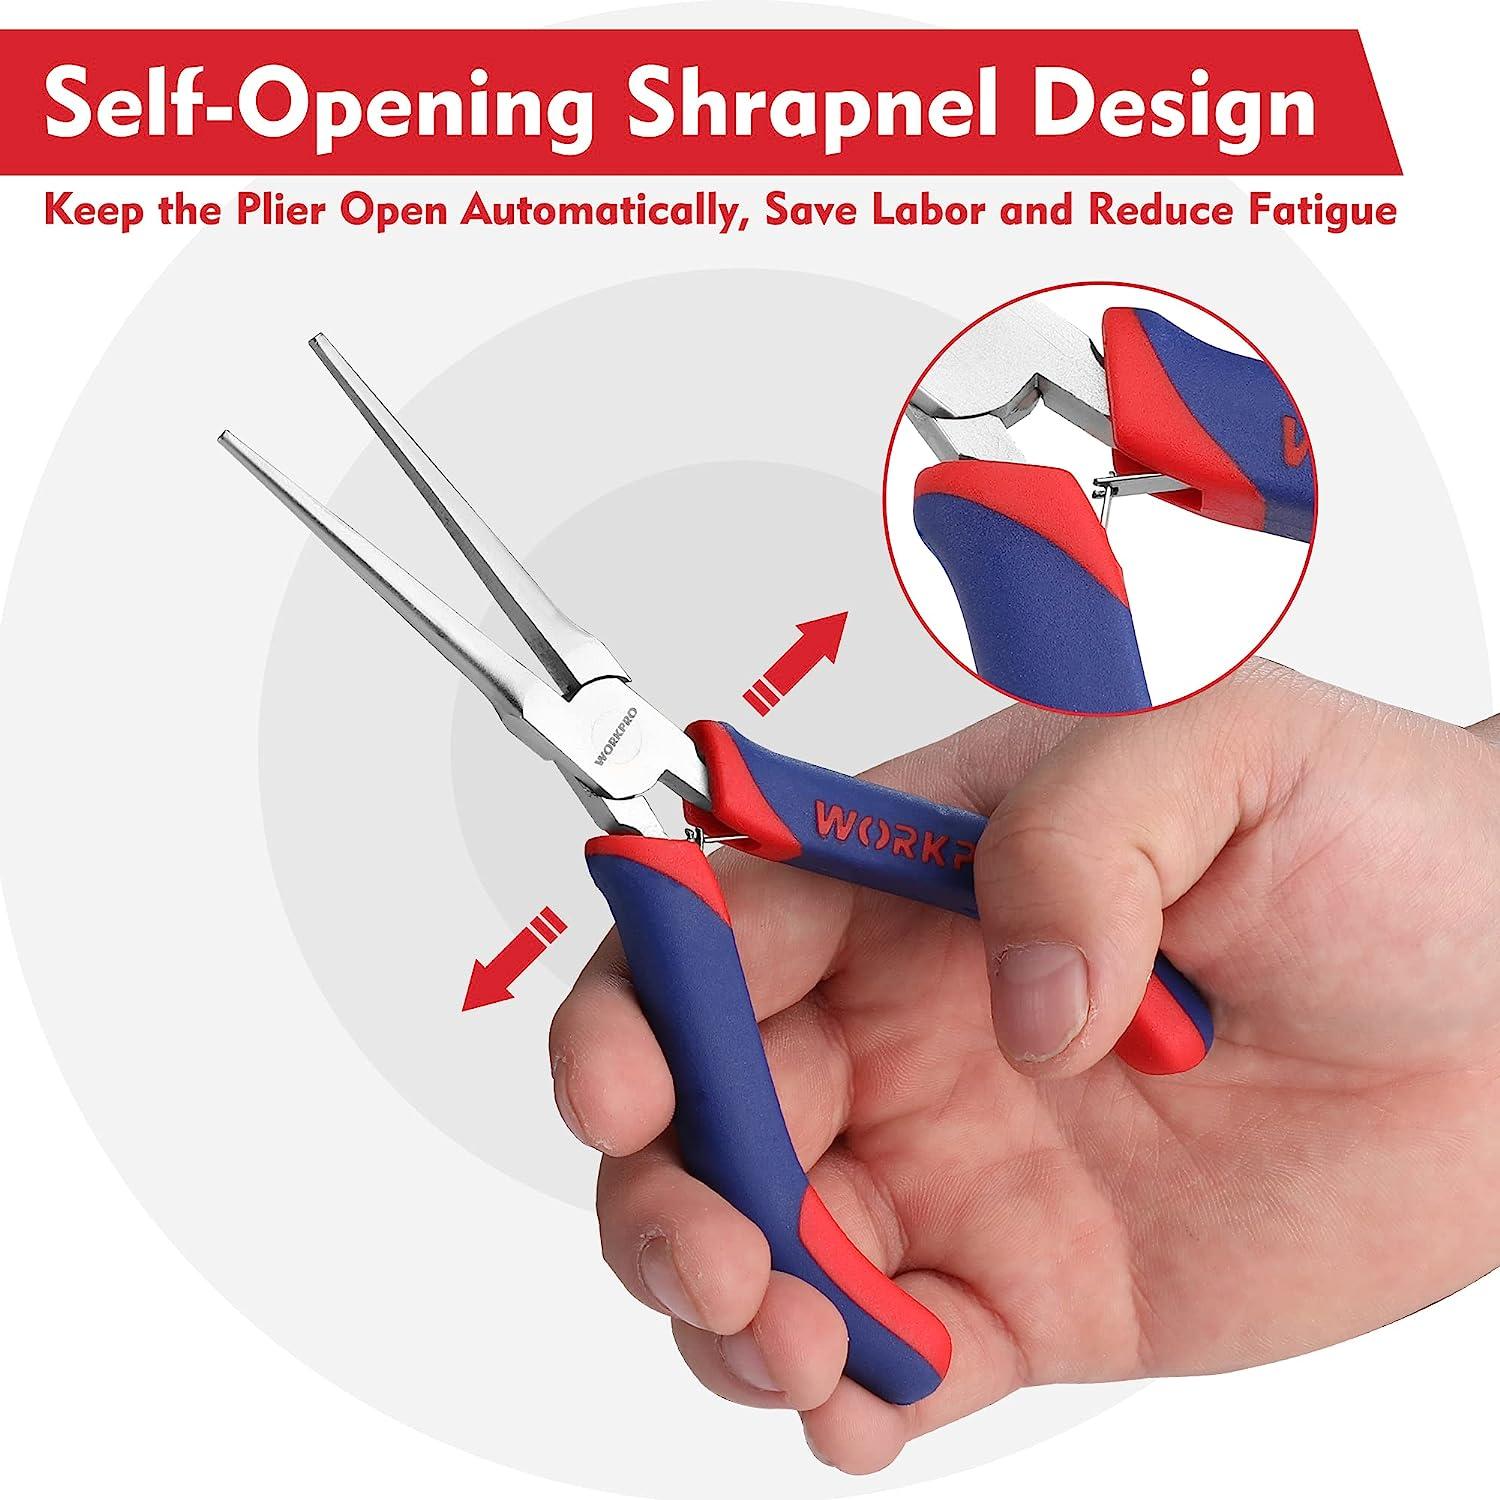 6 in. Round Nose Pliers with Comfort Grip Handles